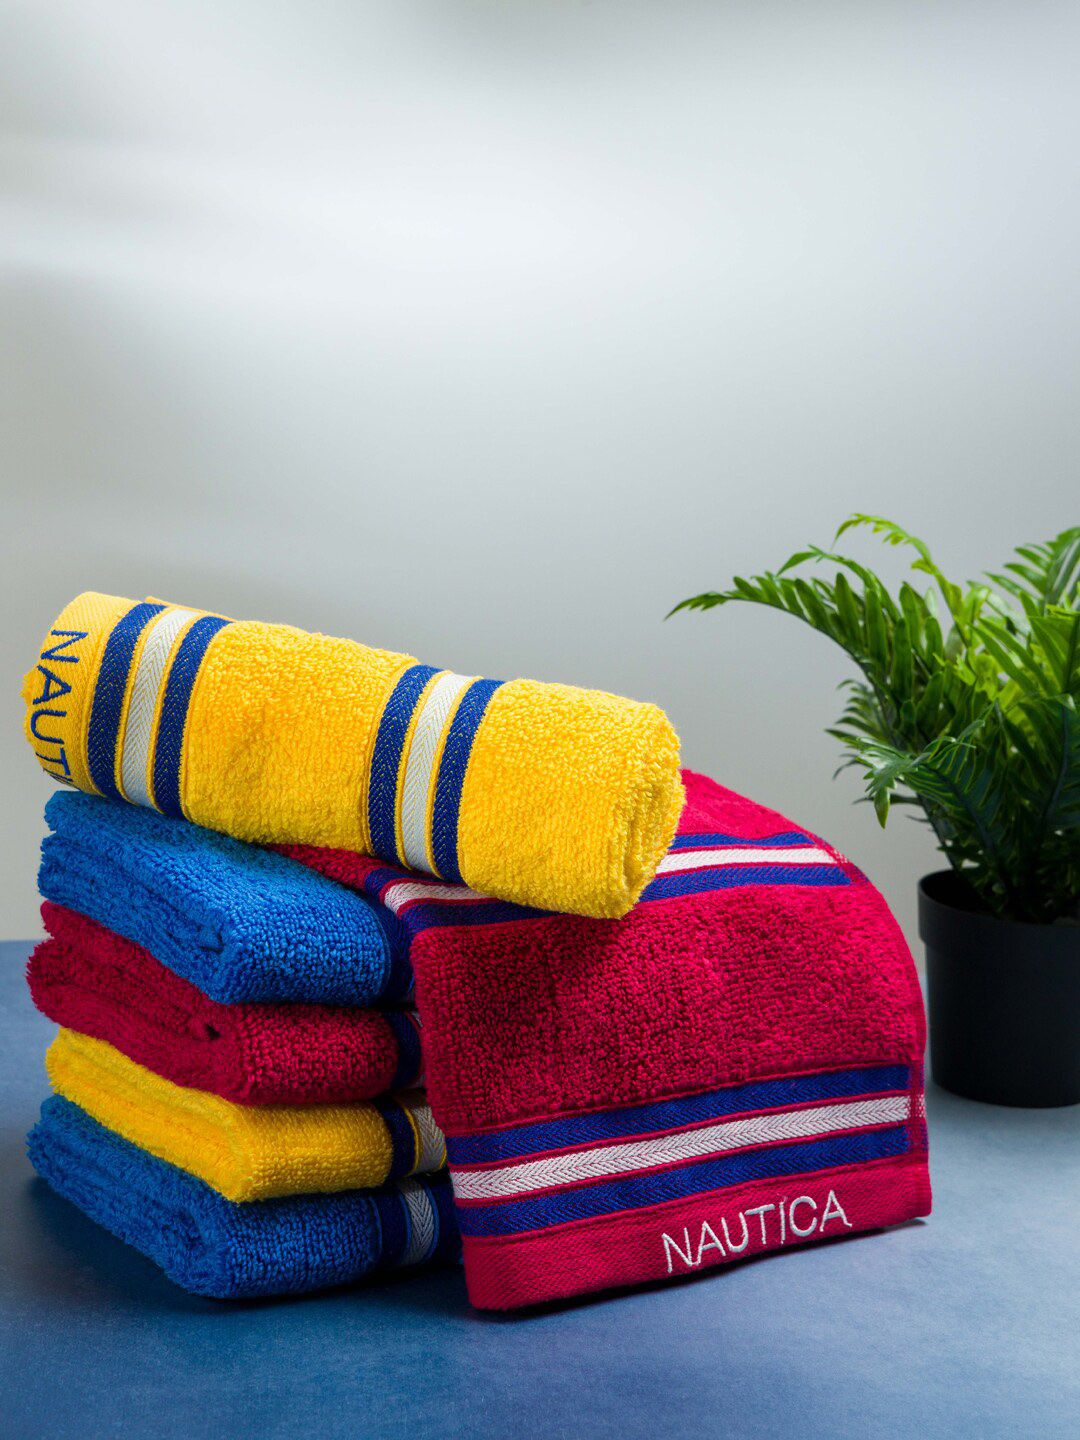 Nautica Set of 6 Solid GSM 500 Cotton Hand Towels Price in India